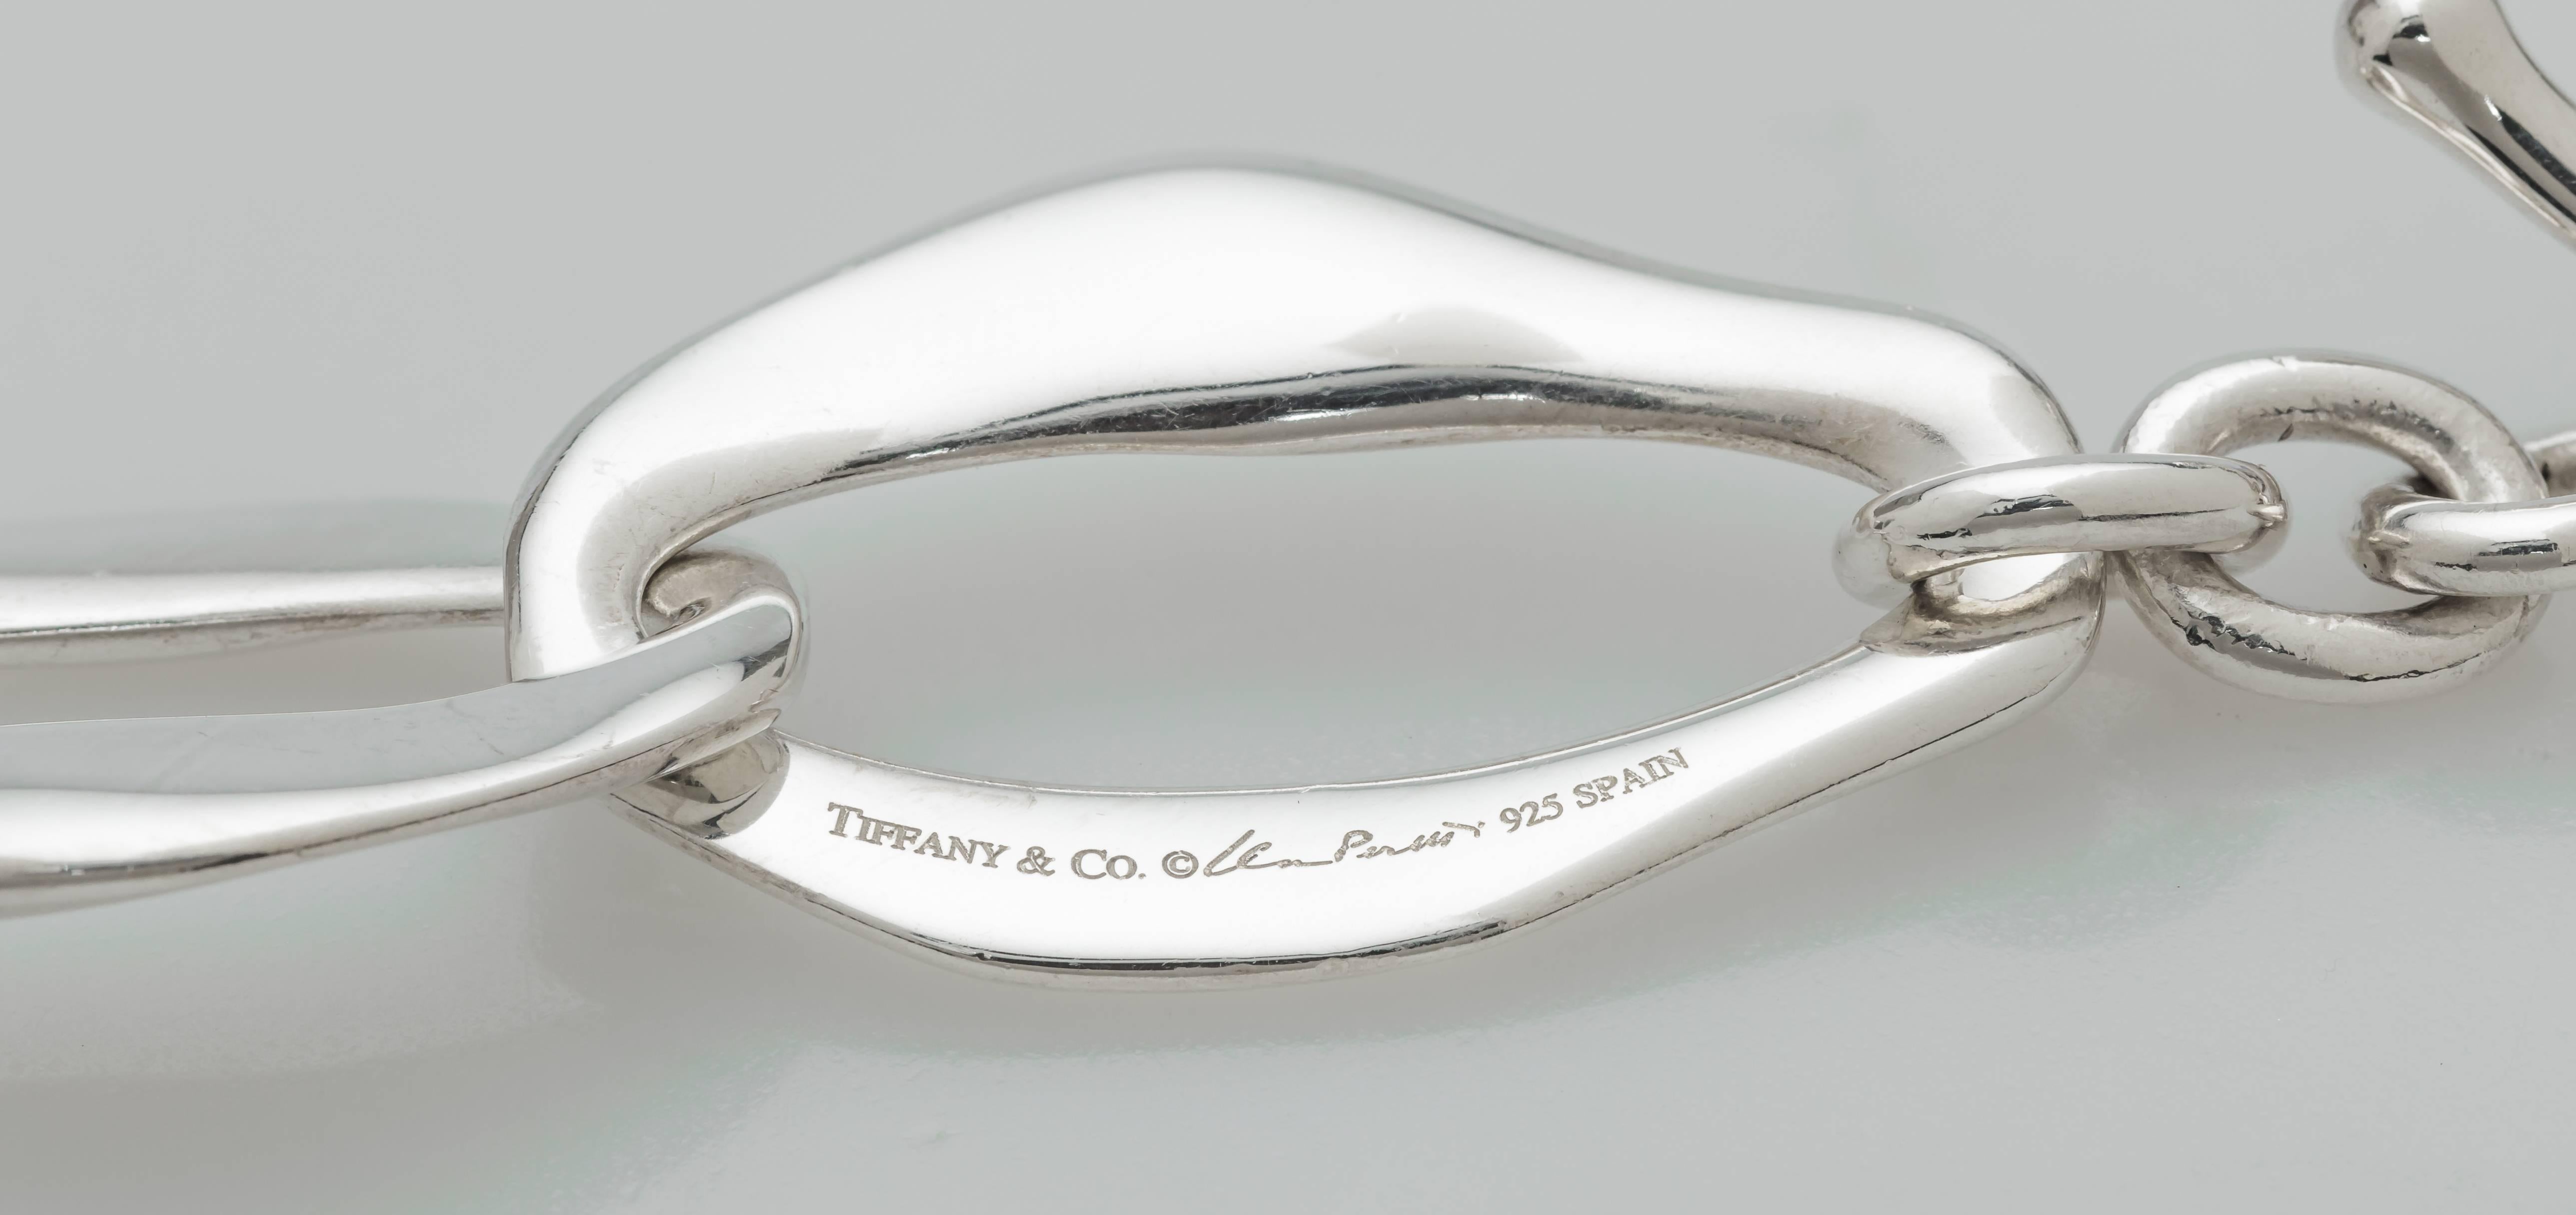 This Tiffany & Co. Aegean toggle bracelet is from the Else Peretti collection.  It features 7 links in sterling silver with each link being 20mm wide.  One link is stamped 